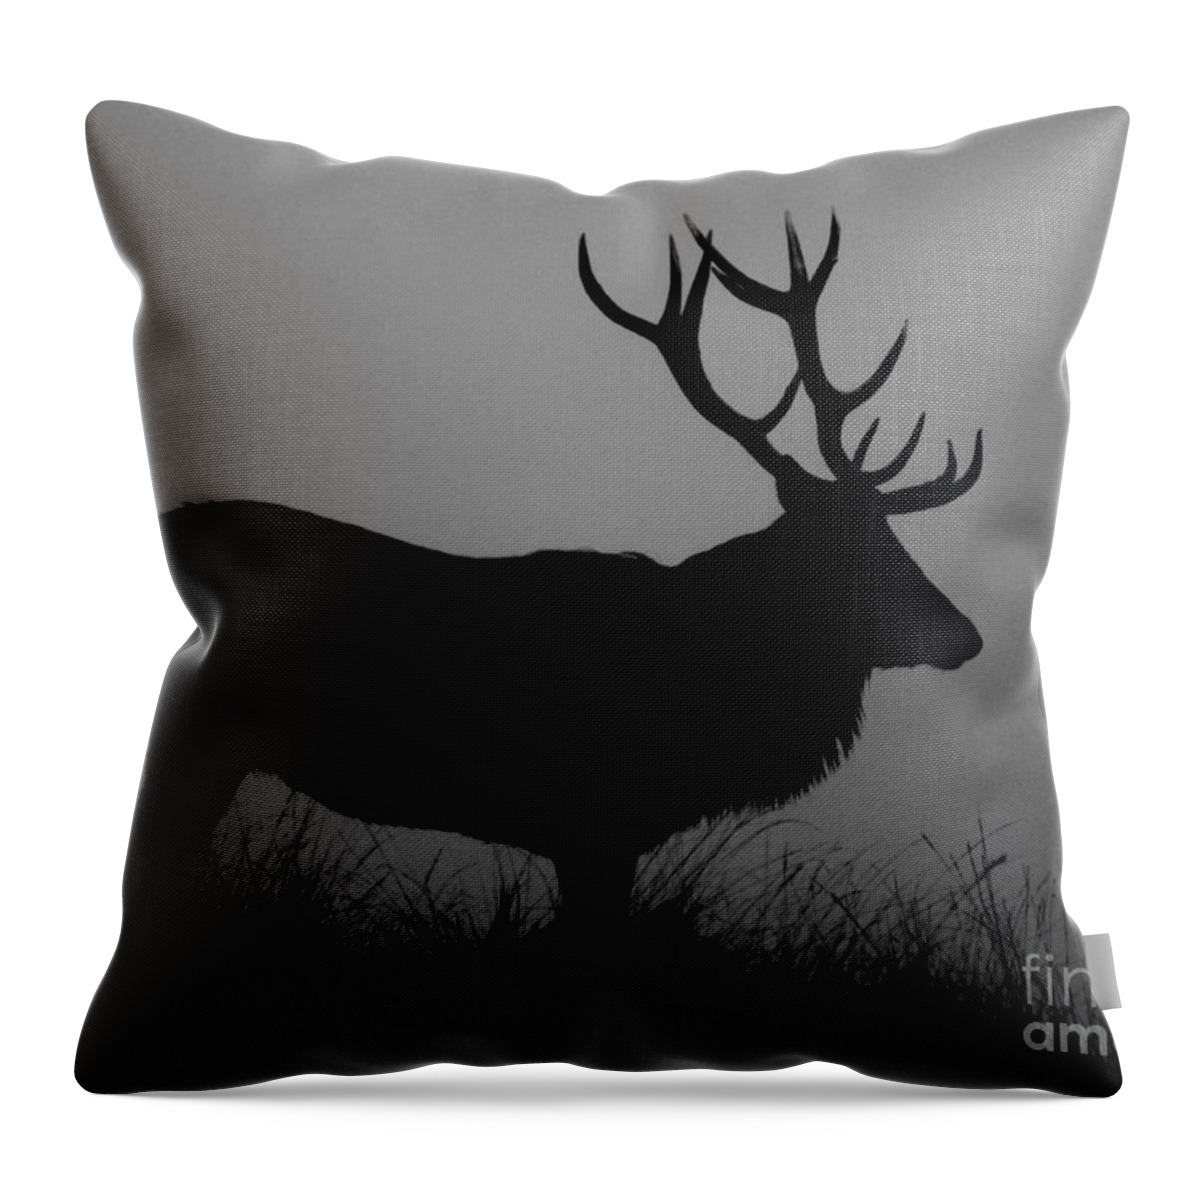 Deer Throw Pillow featuring the photograph Wildlife Red Deer Stag Silhouette by Linsey Williams